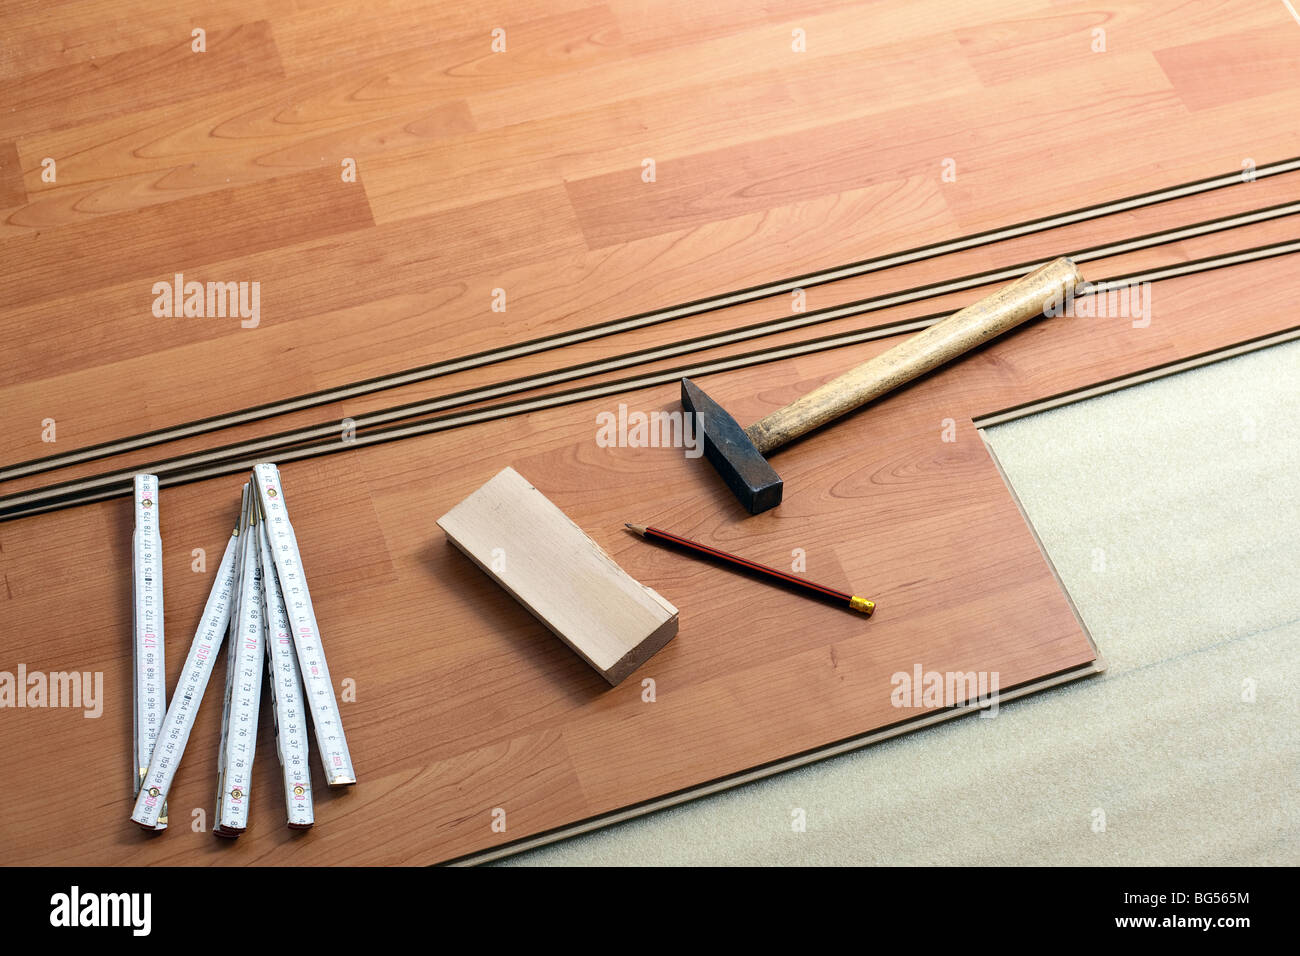 the wood flooring and tools Stock Photo